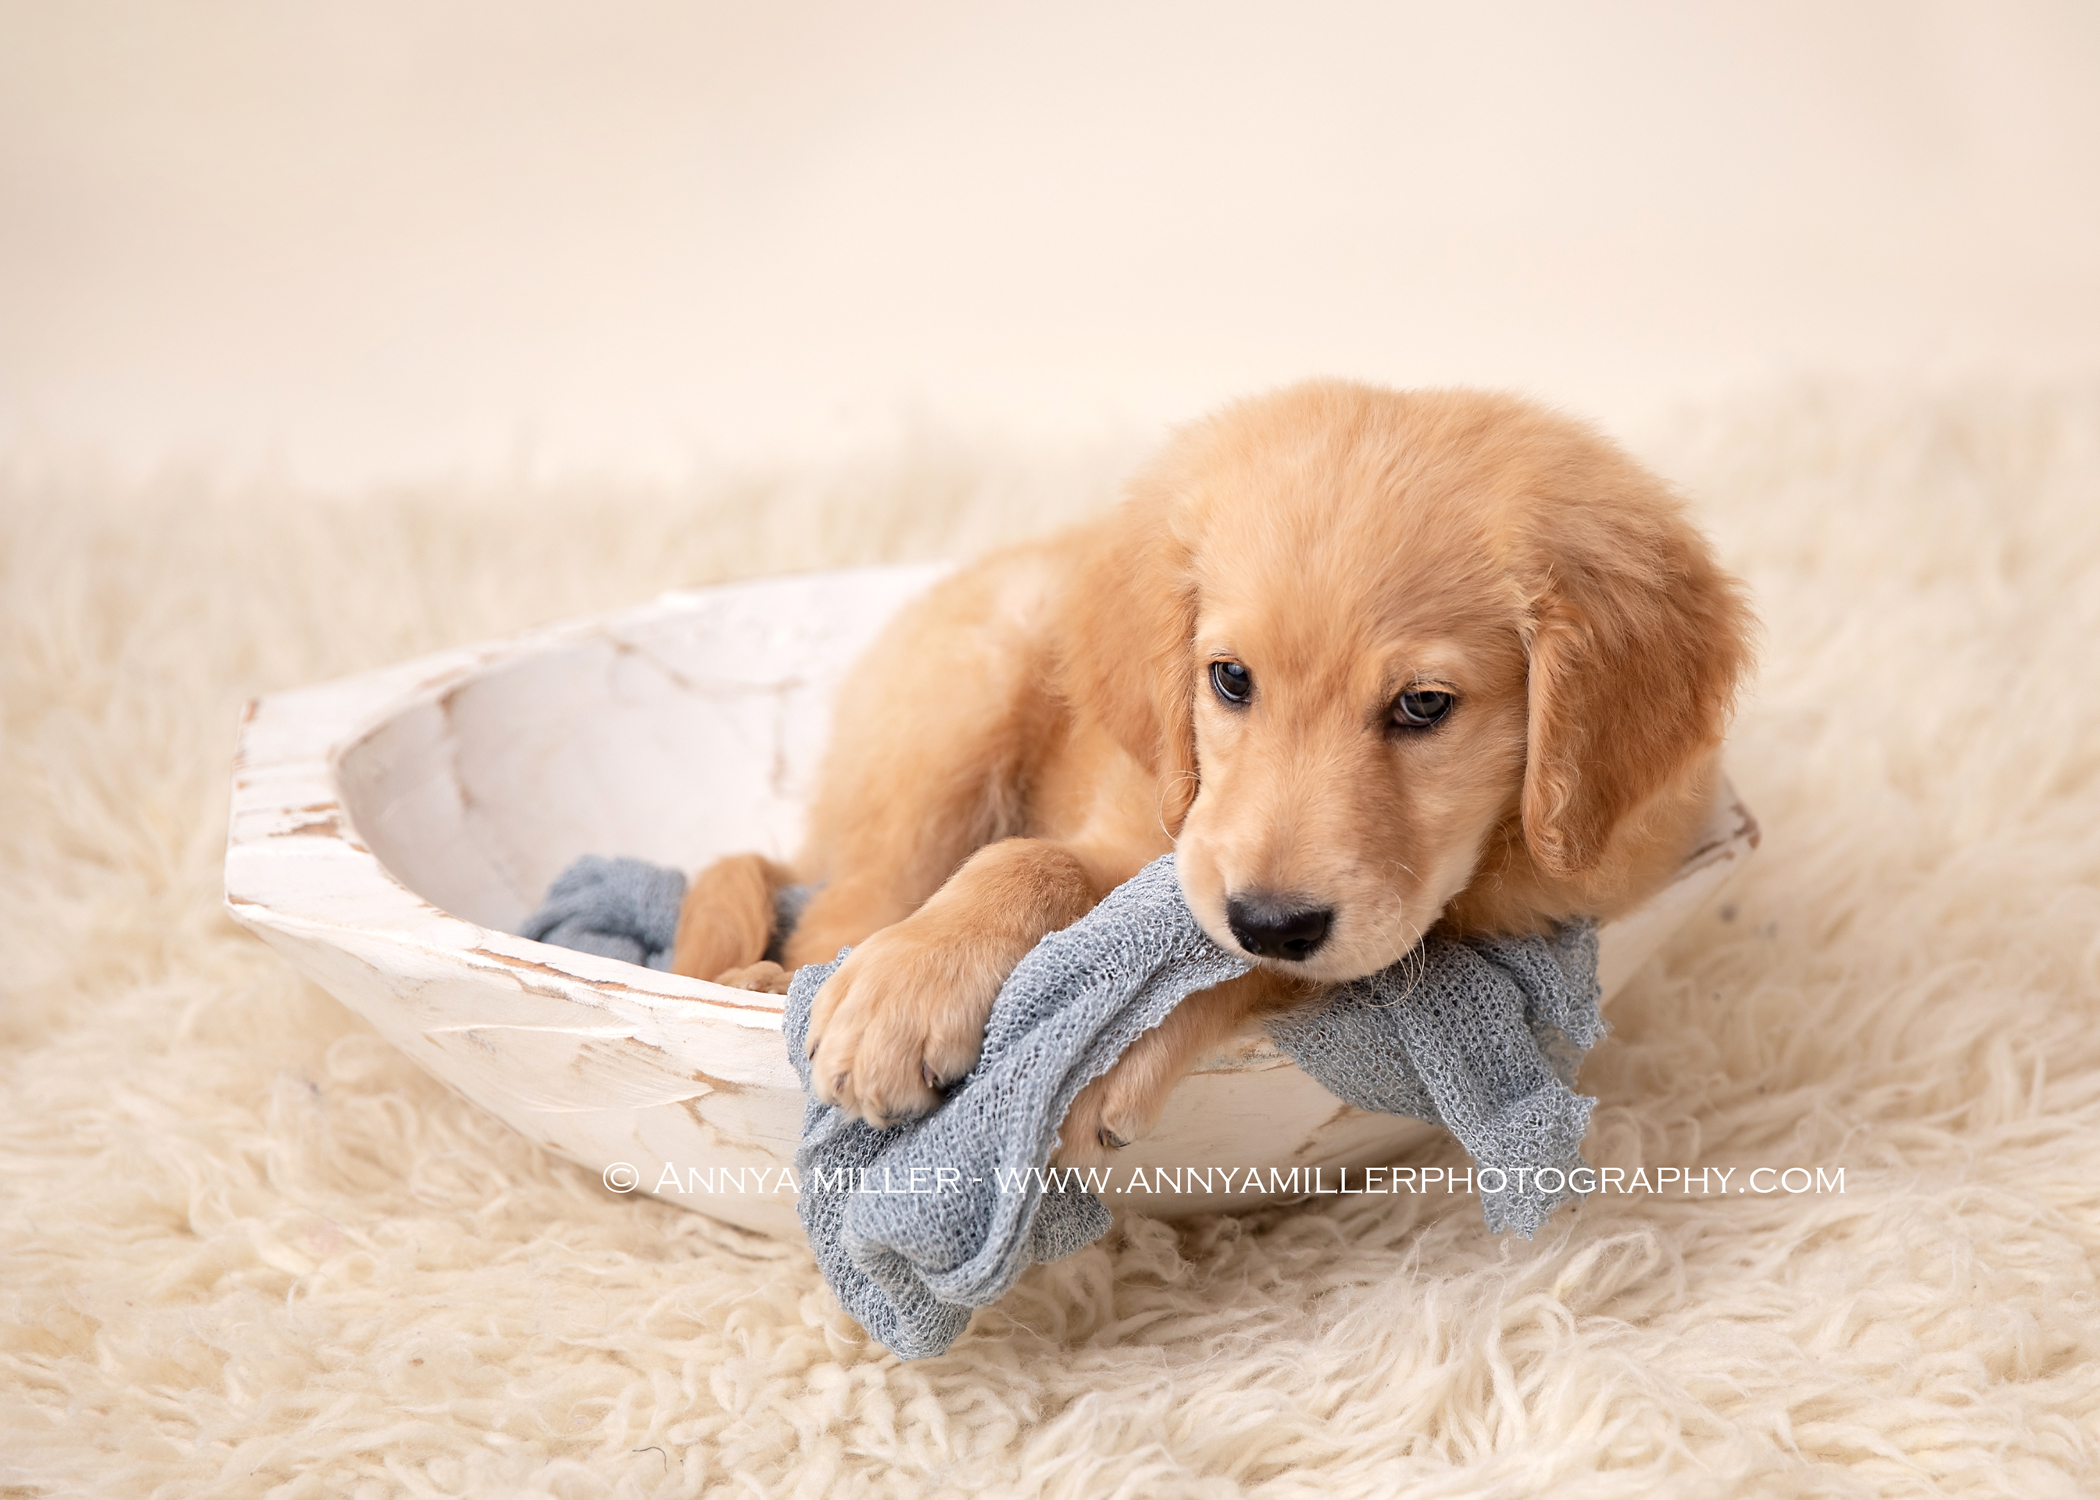 Portrait of goldendoodle puppy posing as a newborn by Pickering pet photographer Annya Miller